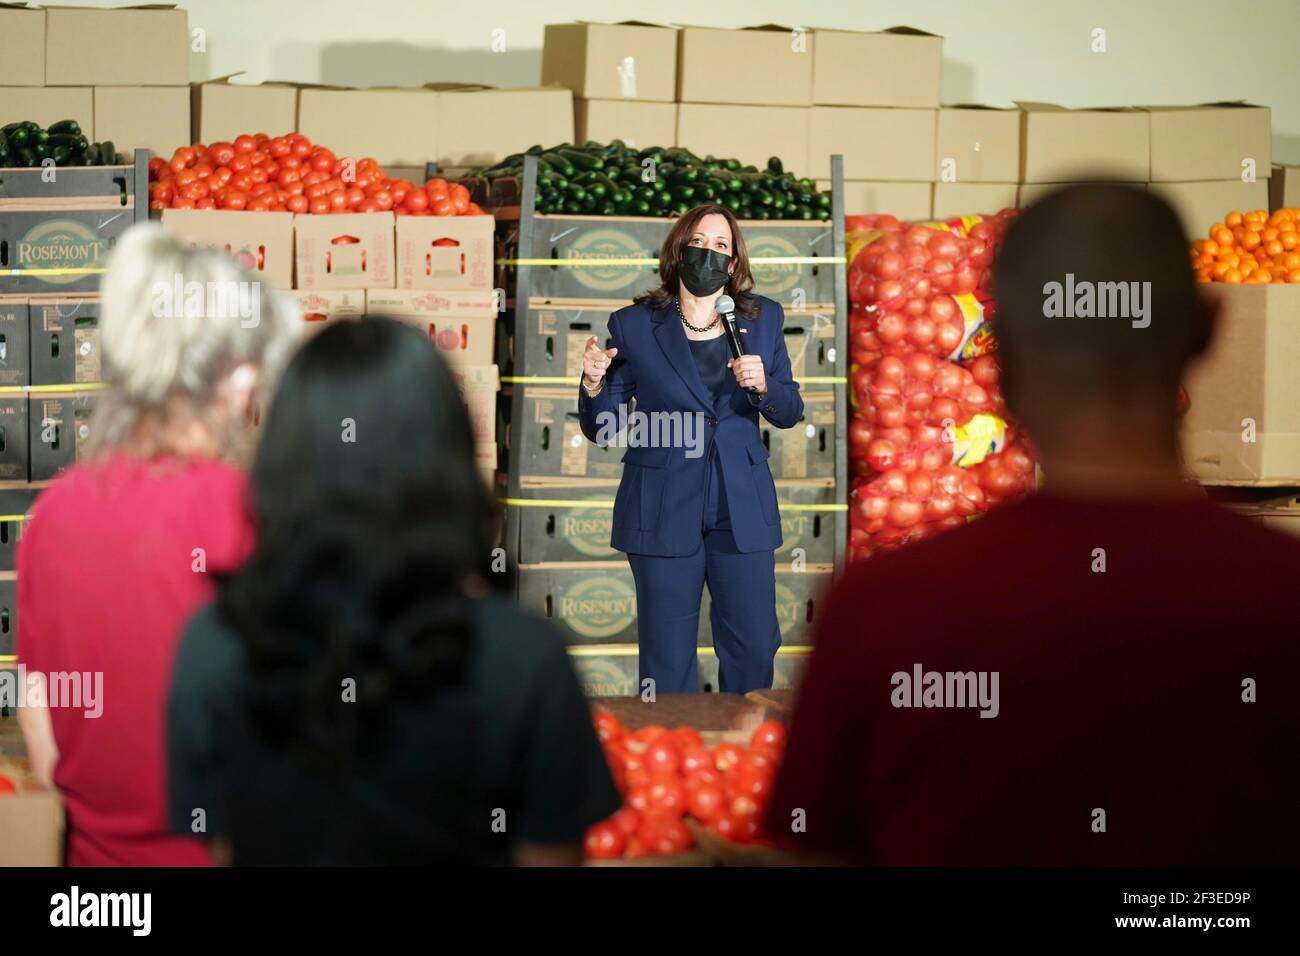 U.S Vice President Kamala Harris, addresses food service workers during a visit to the Culinary Union at the Culinary Academy of Las Vegas, March 15, 2021 in Las Vegas, Nevada. Credit: Planetpix/Alamy Live News Stock Photo